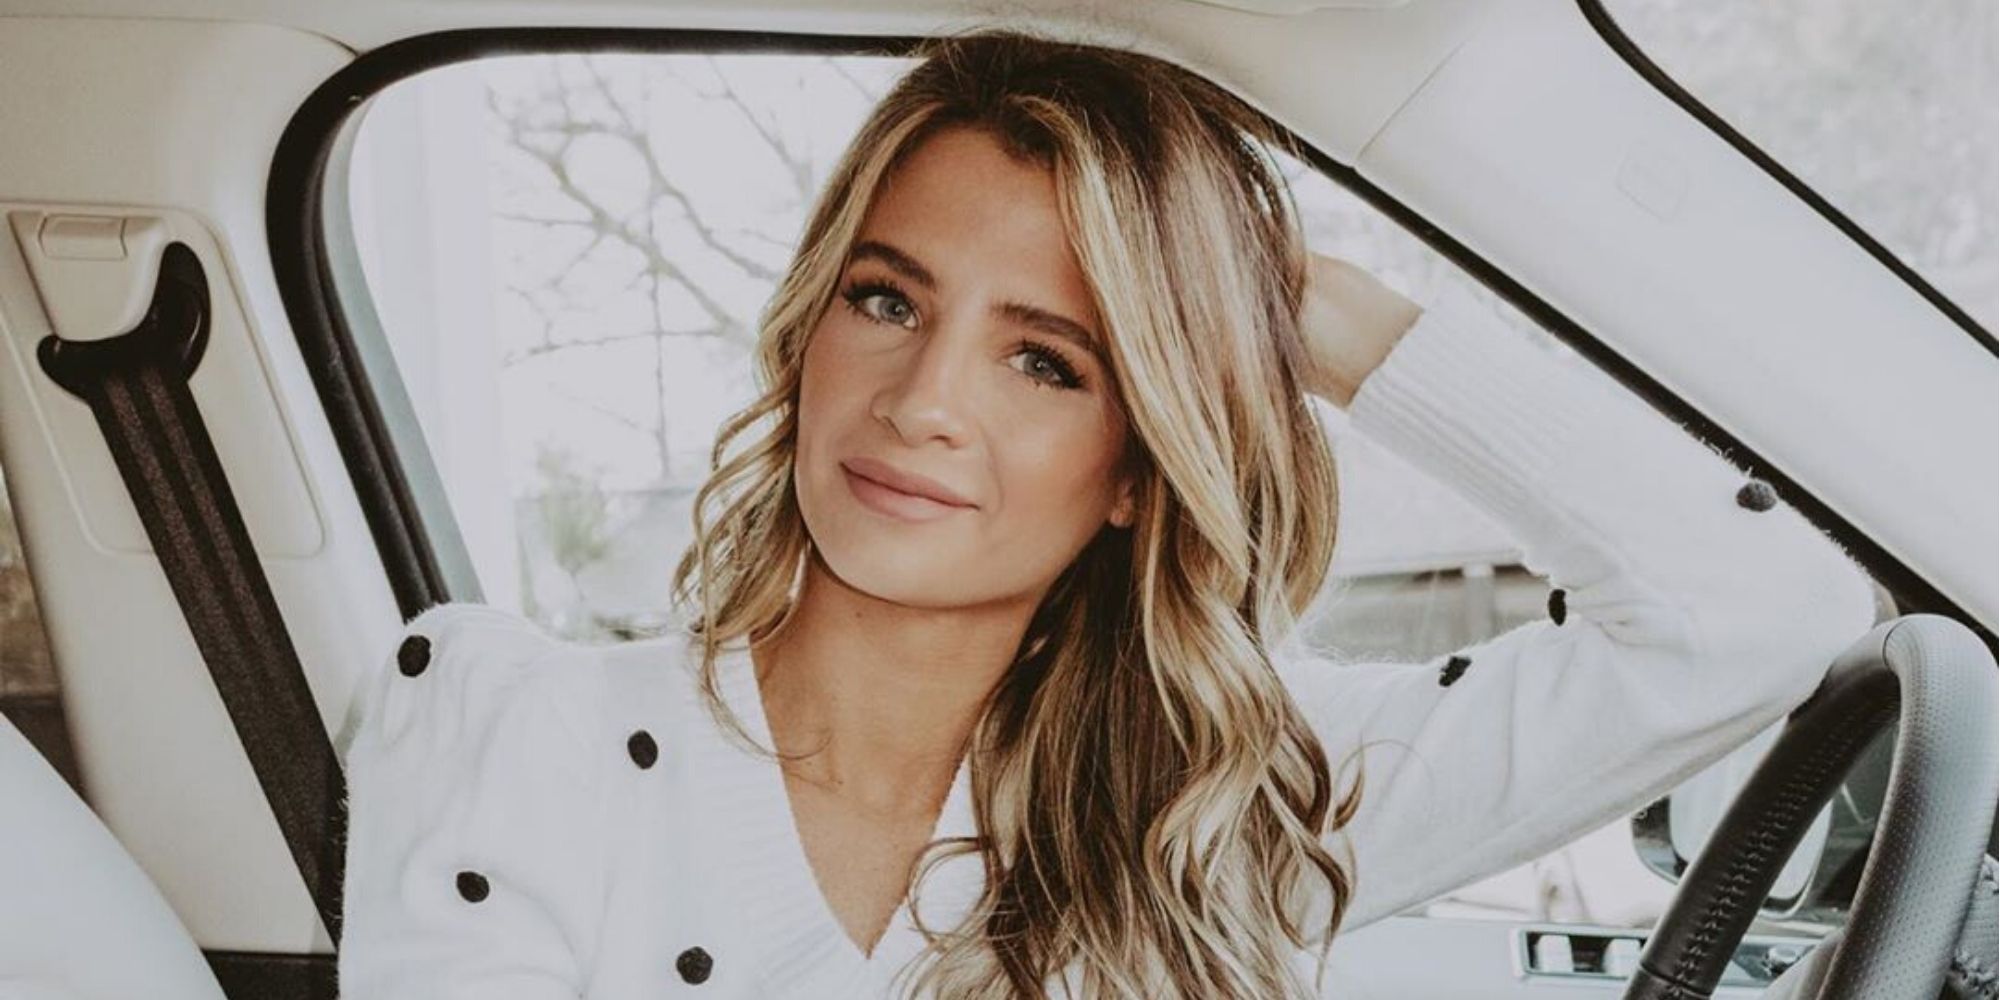 Southern Charm's Naomie Olindo with elbow on steering wheel in car